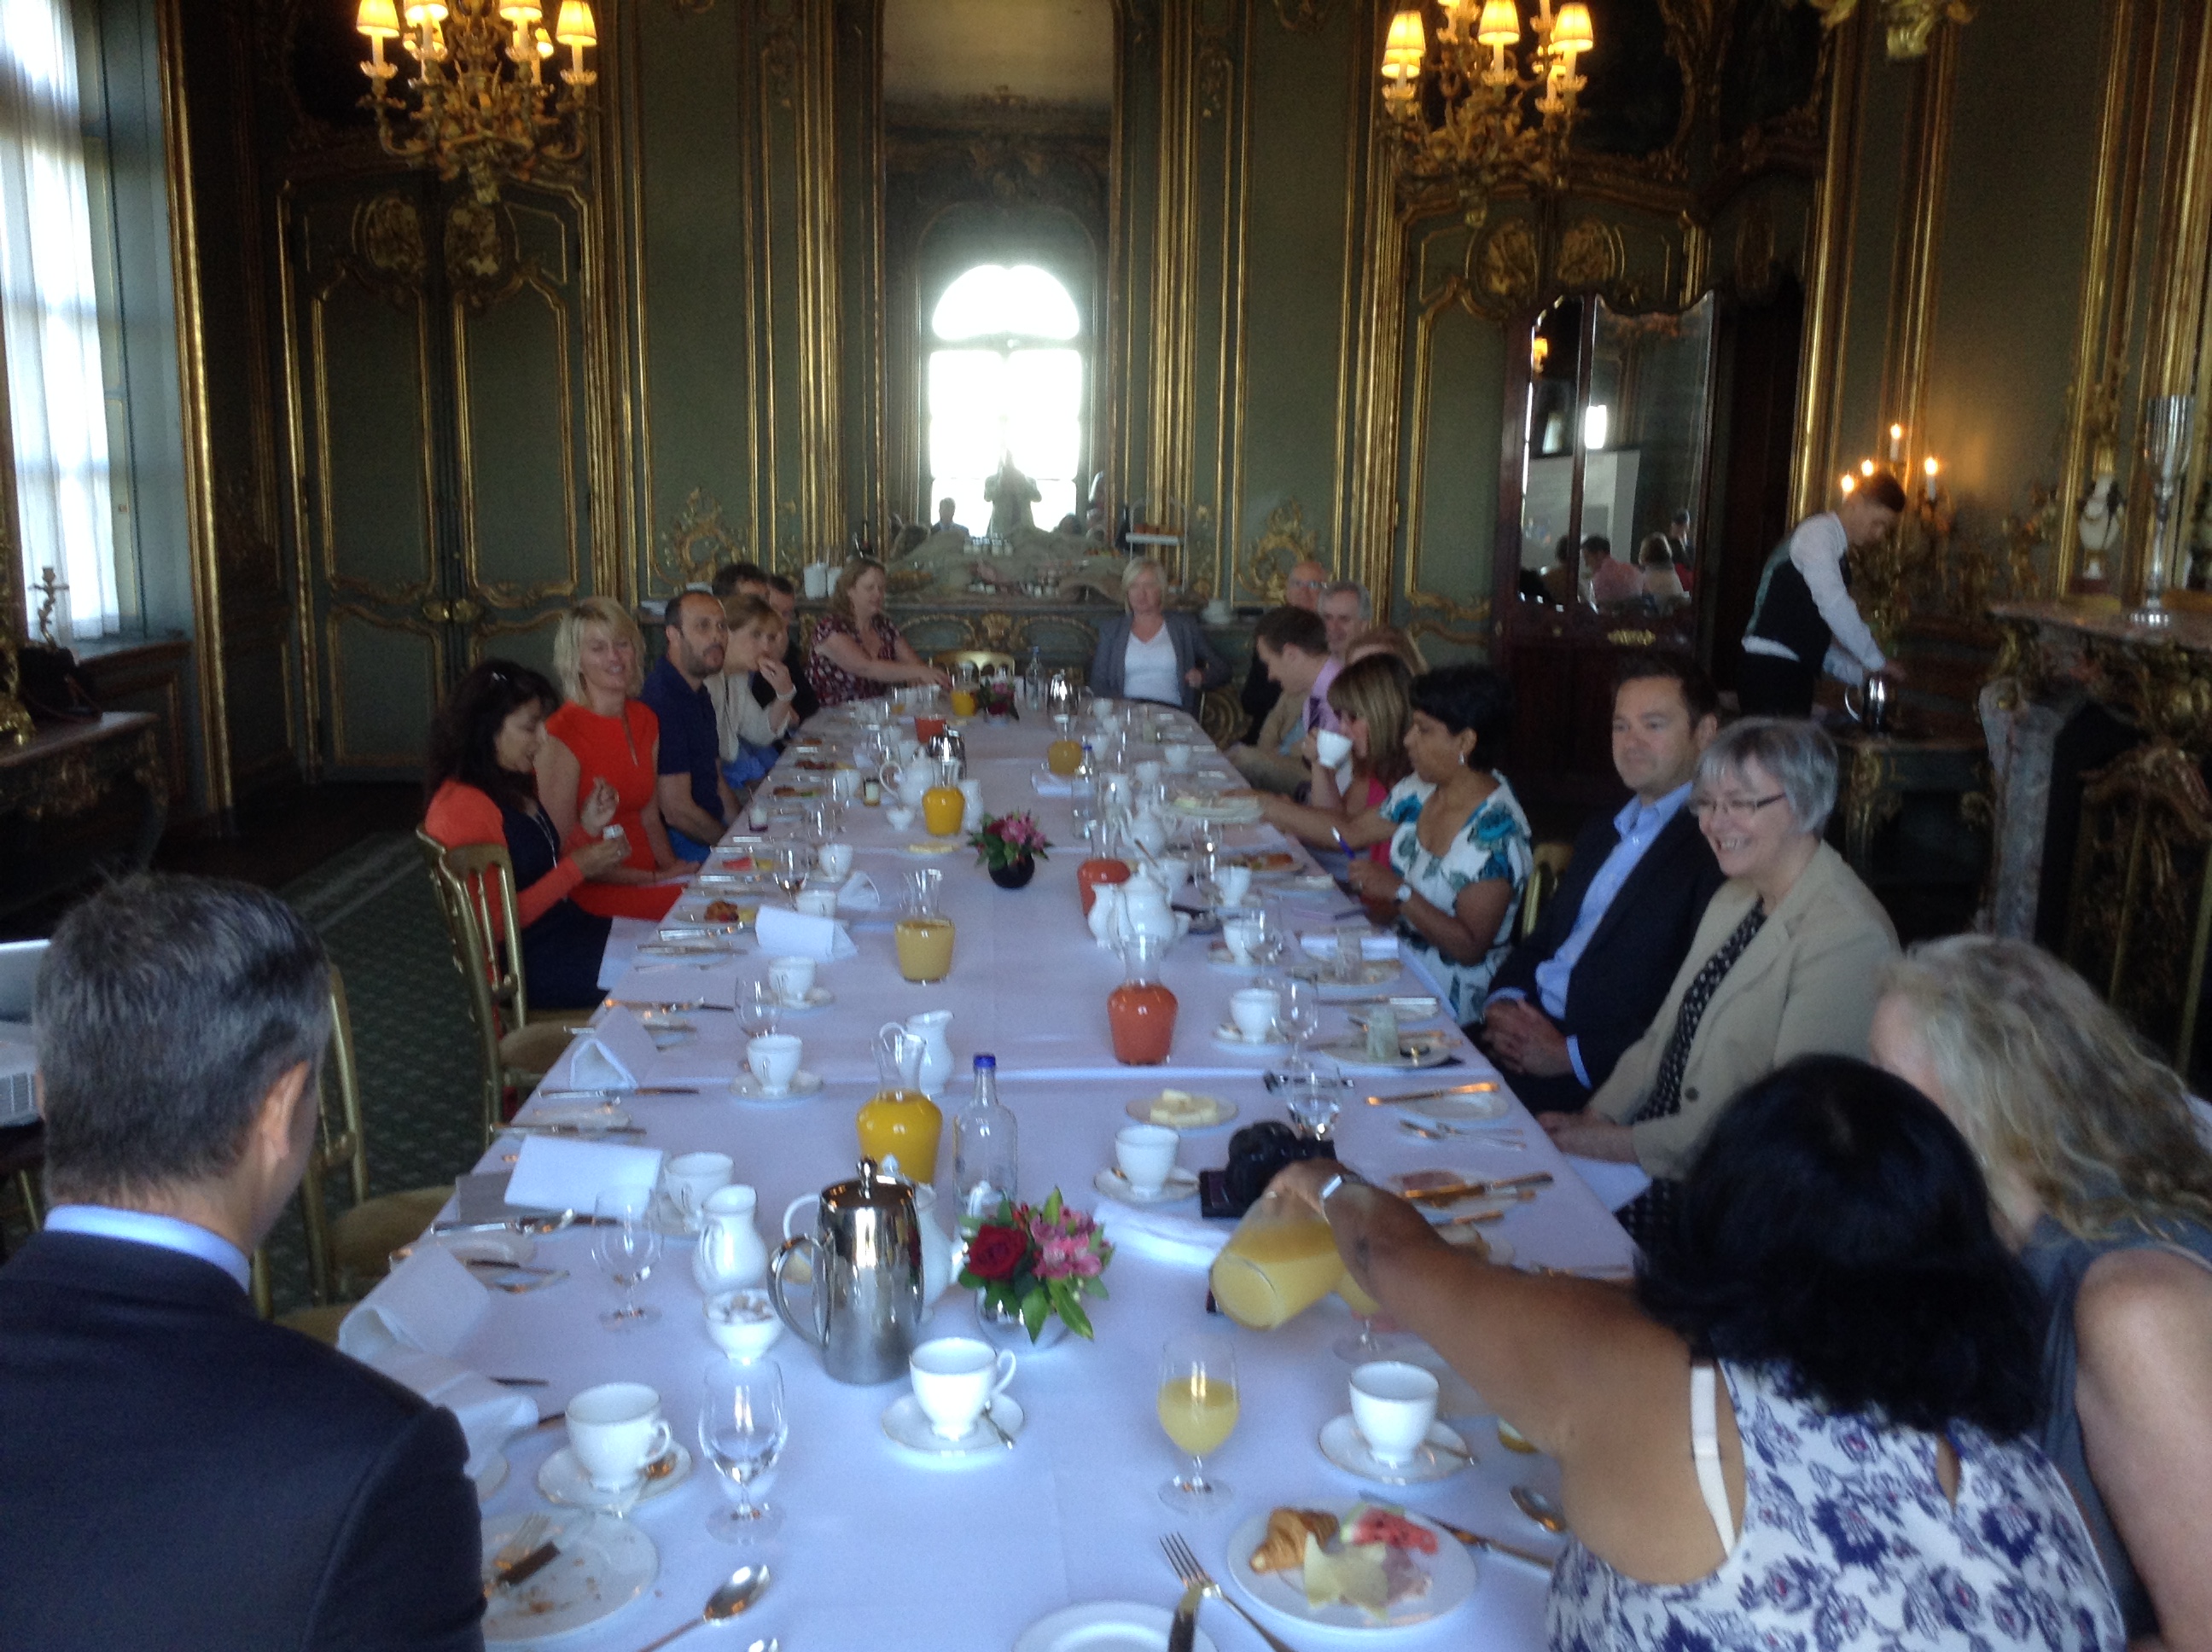 Talking business networking pearls while taking us back to the Twenties at Cliveden House